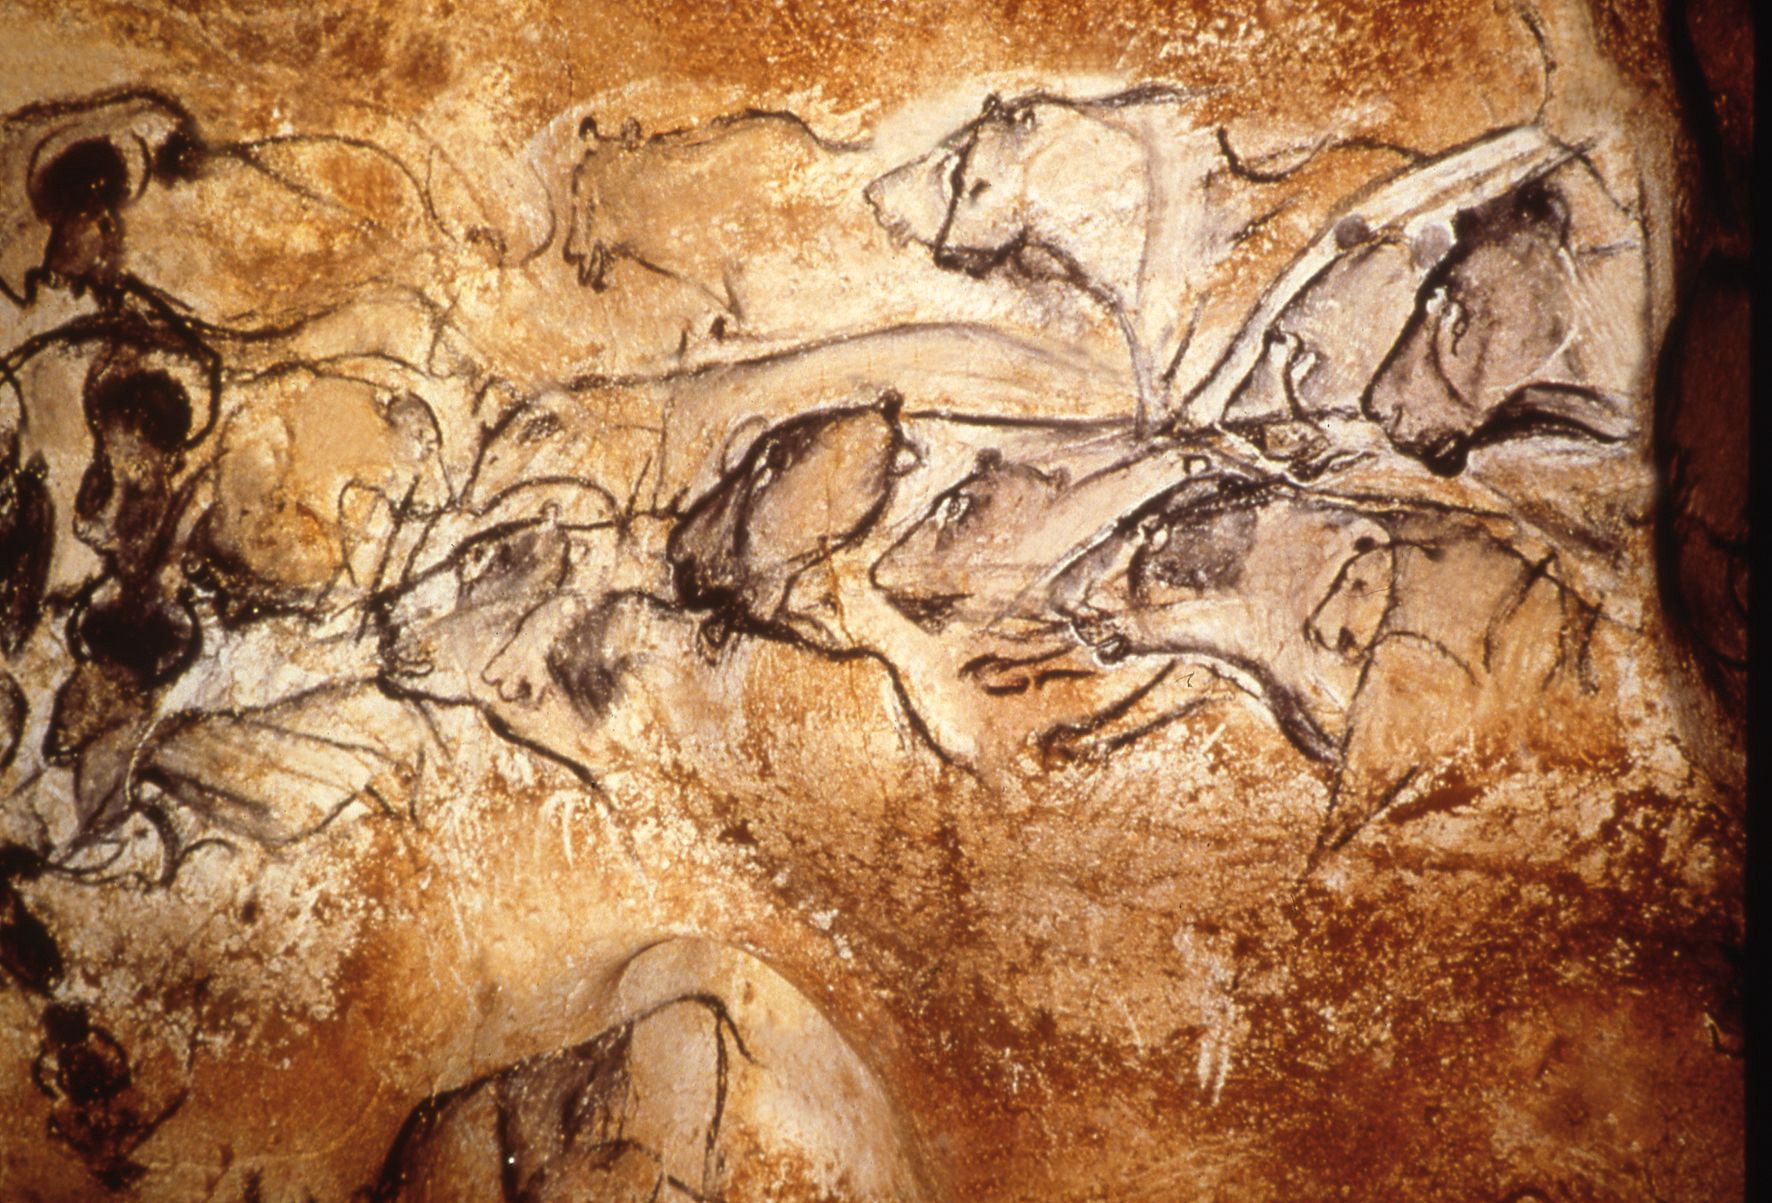 Wild Tales From History - chauvet pont d arc cave